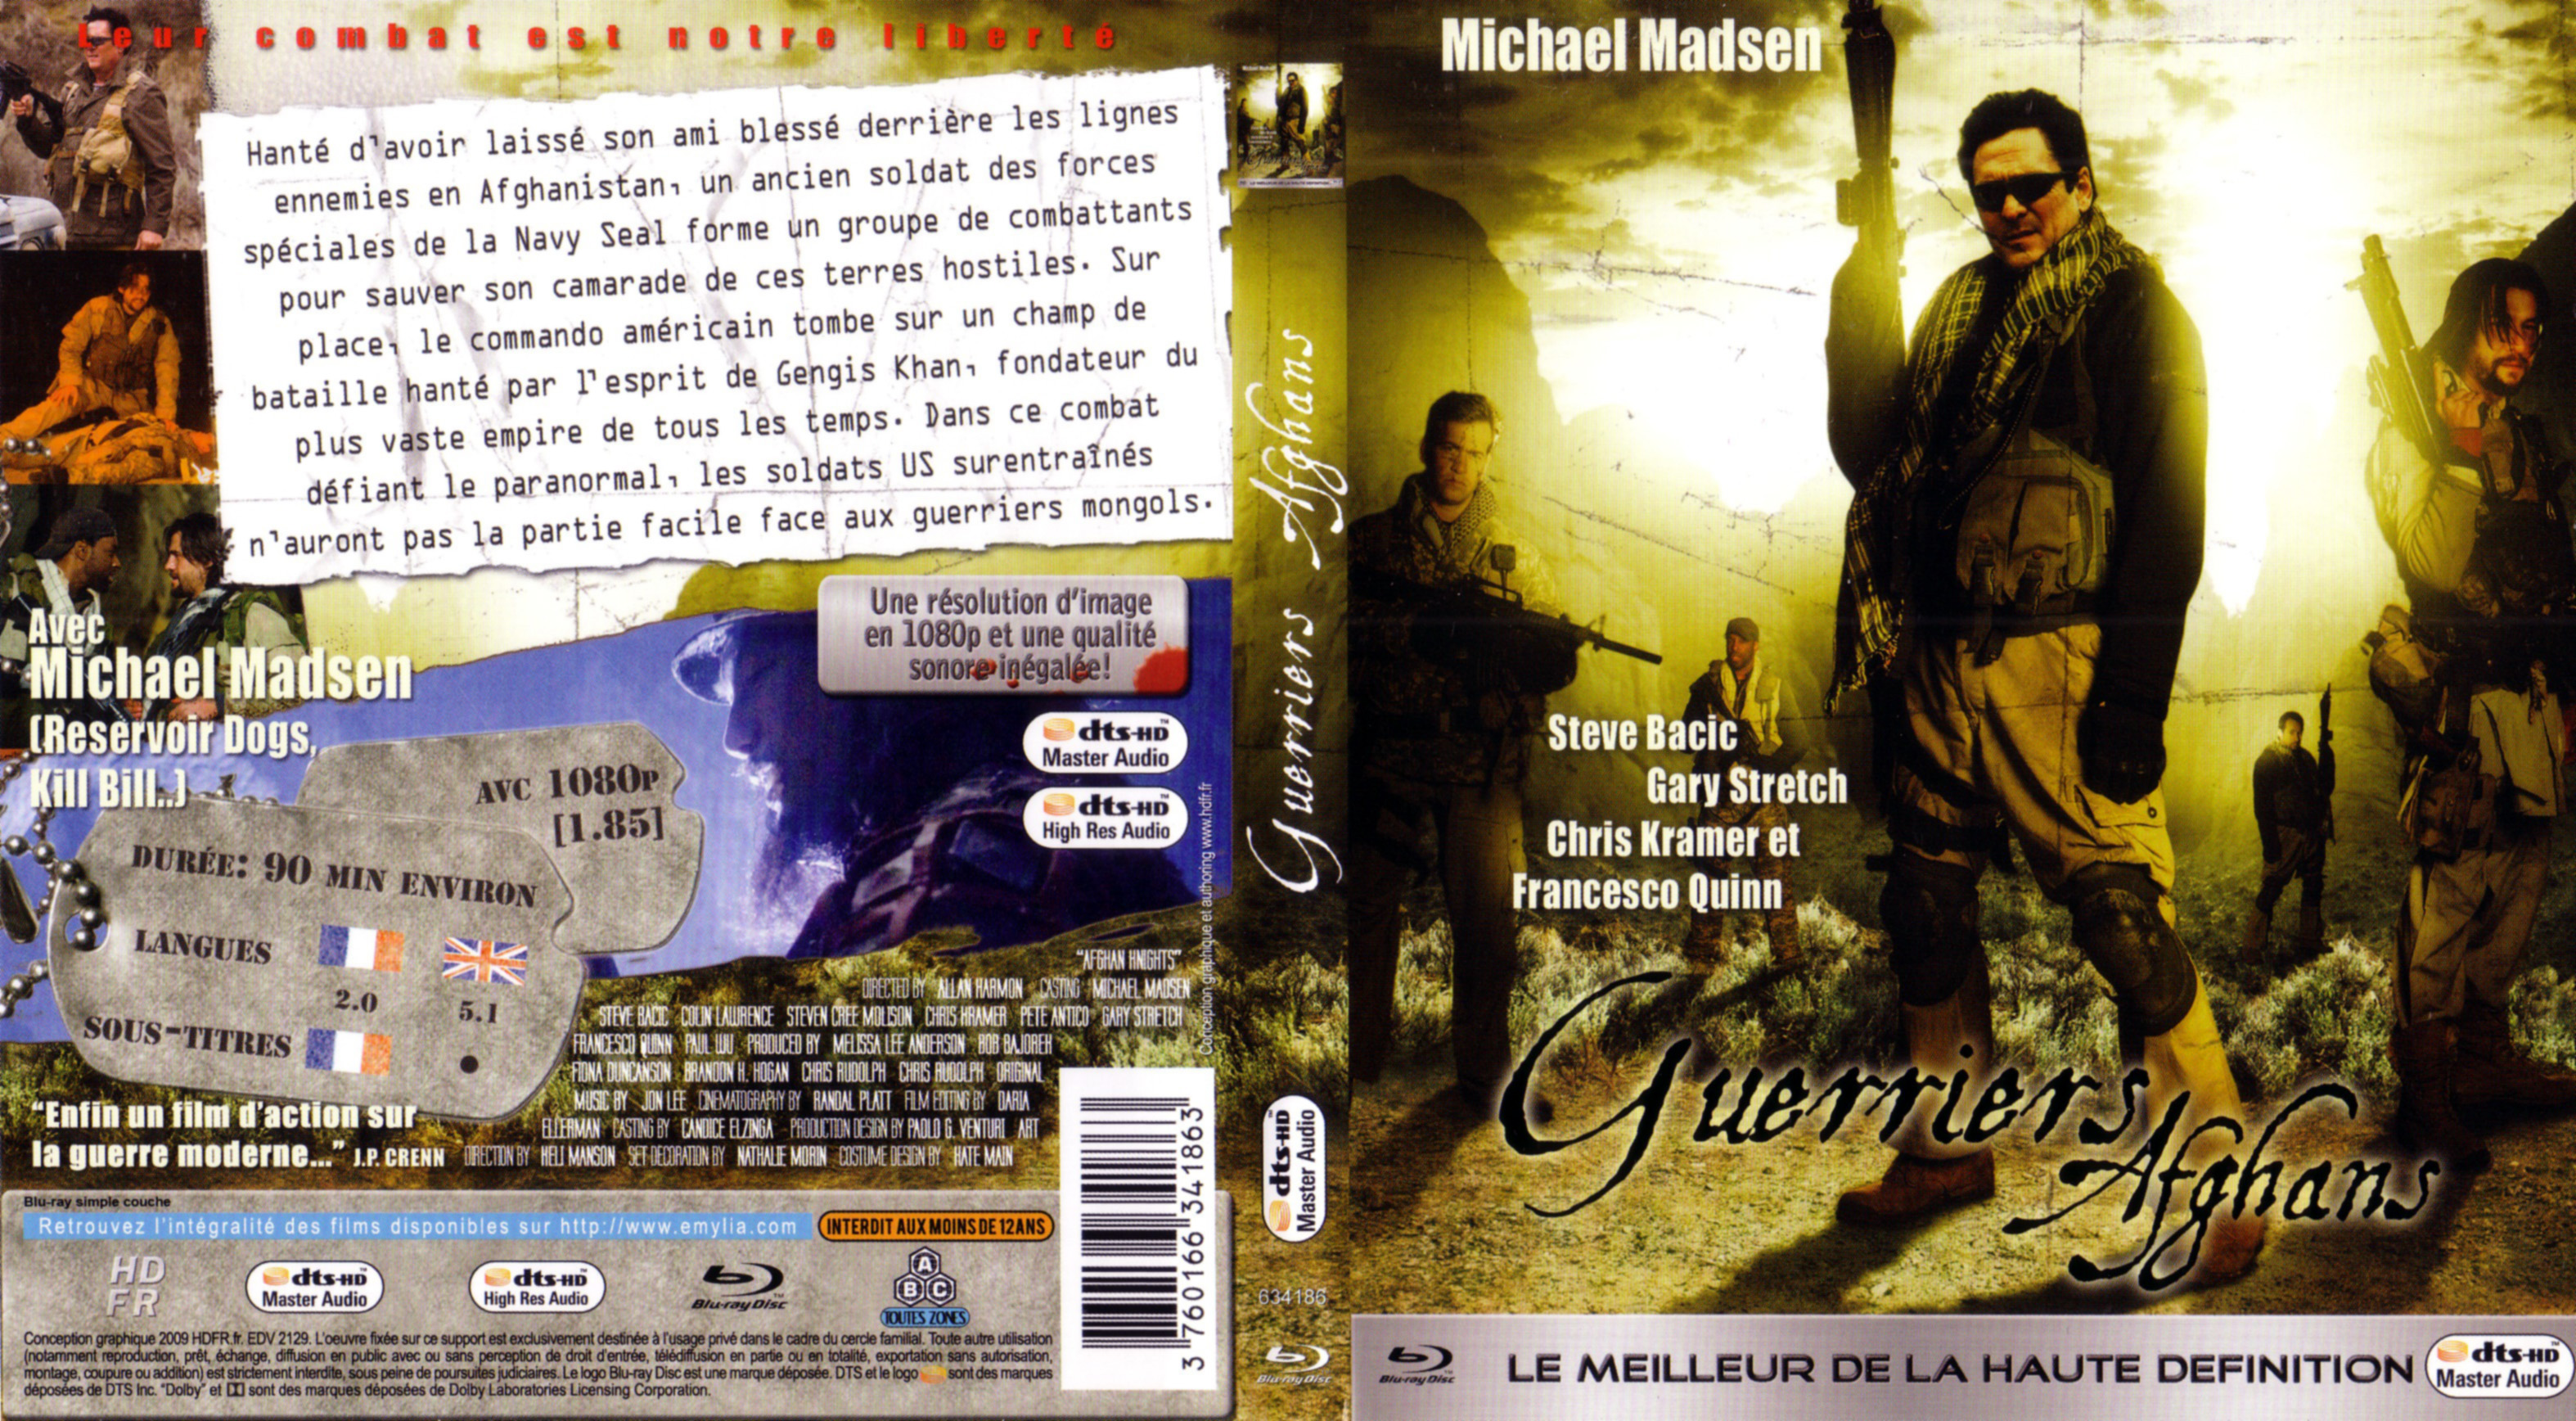 Jaquette DVD Guerriers afghans (BLU-RAY)